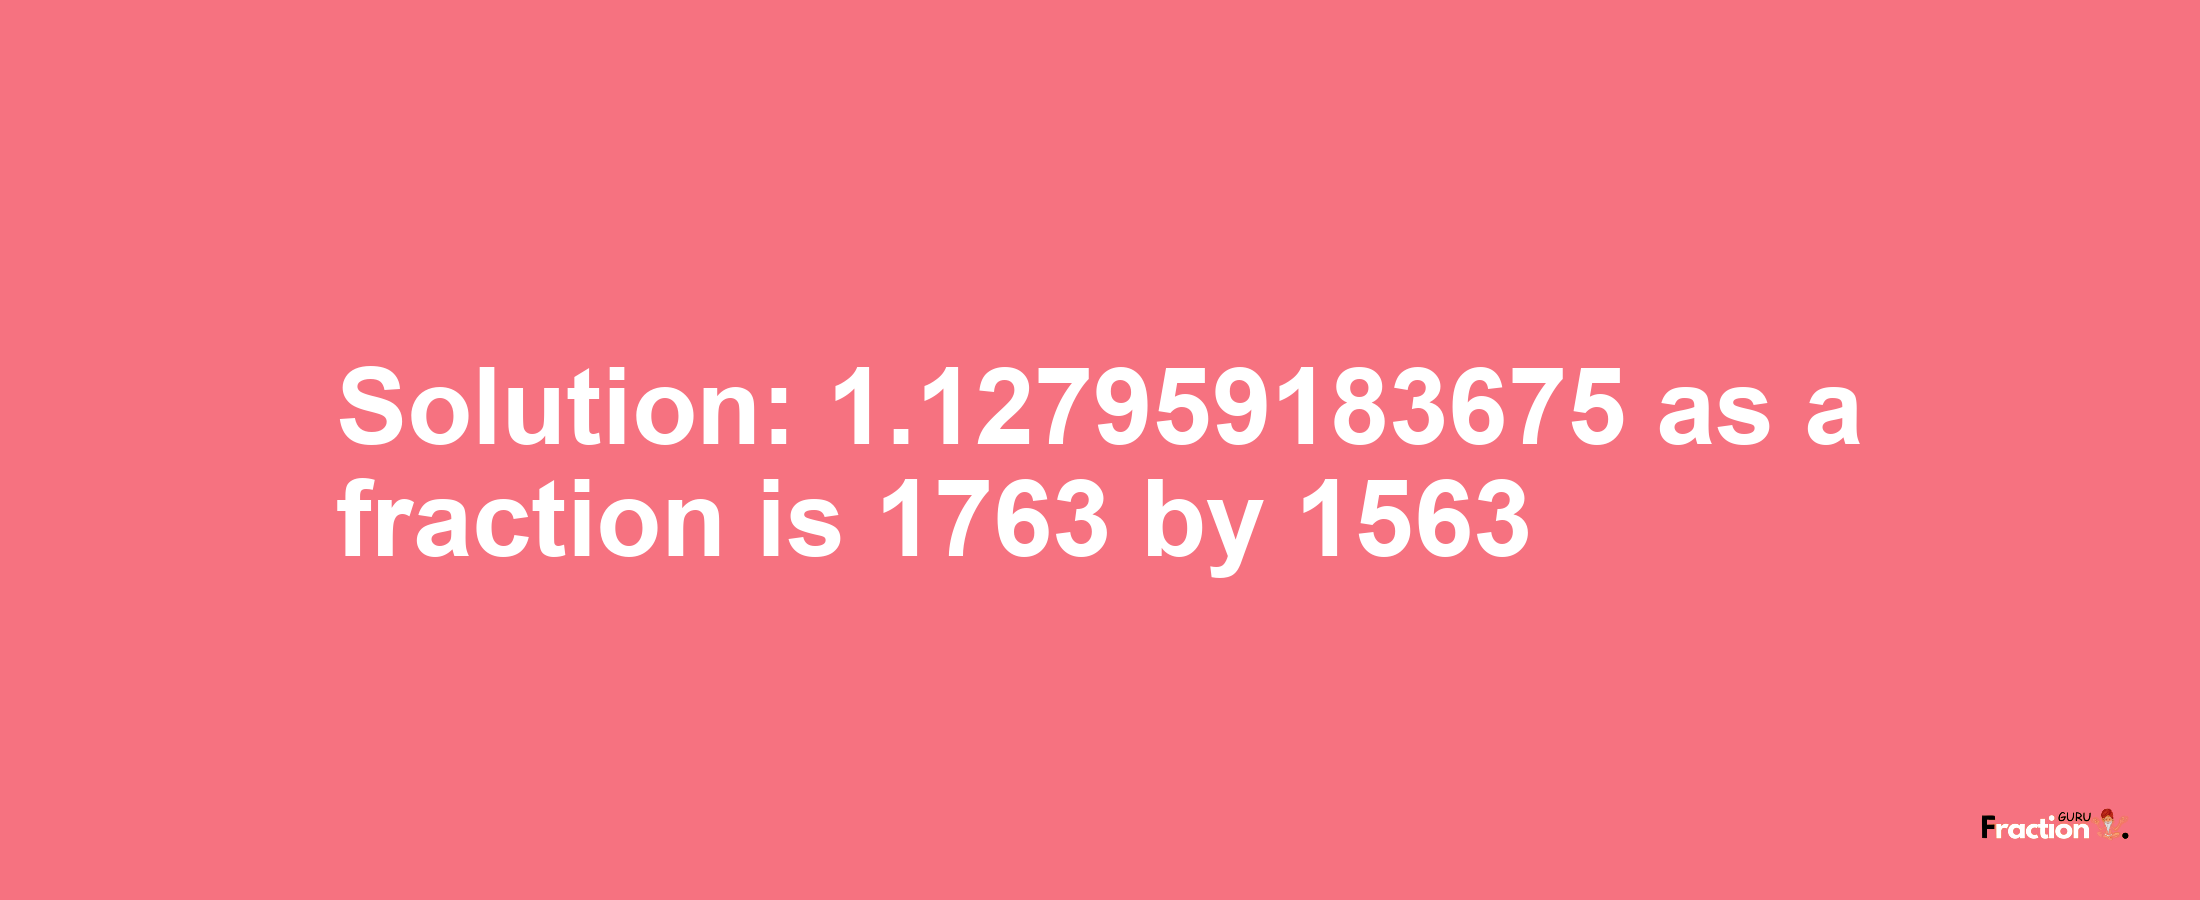 Solution:1.127959183675 as a fraction is 1763/1563